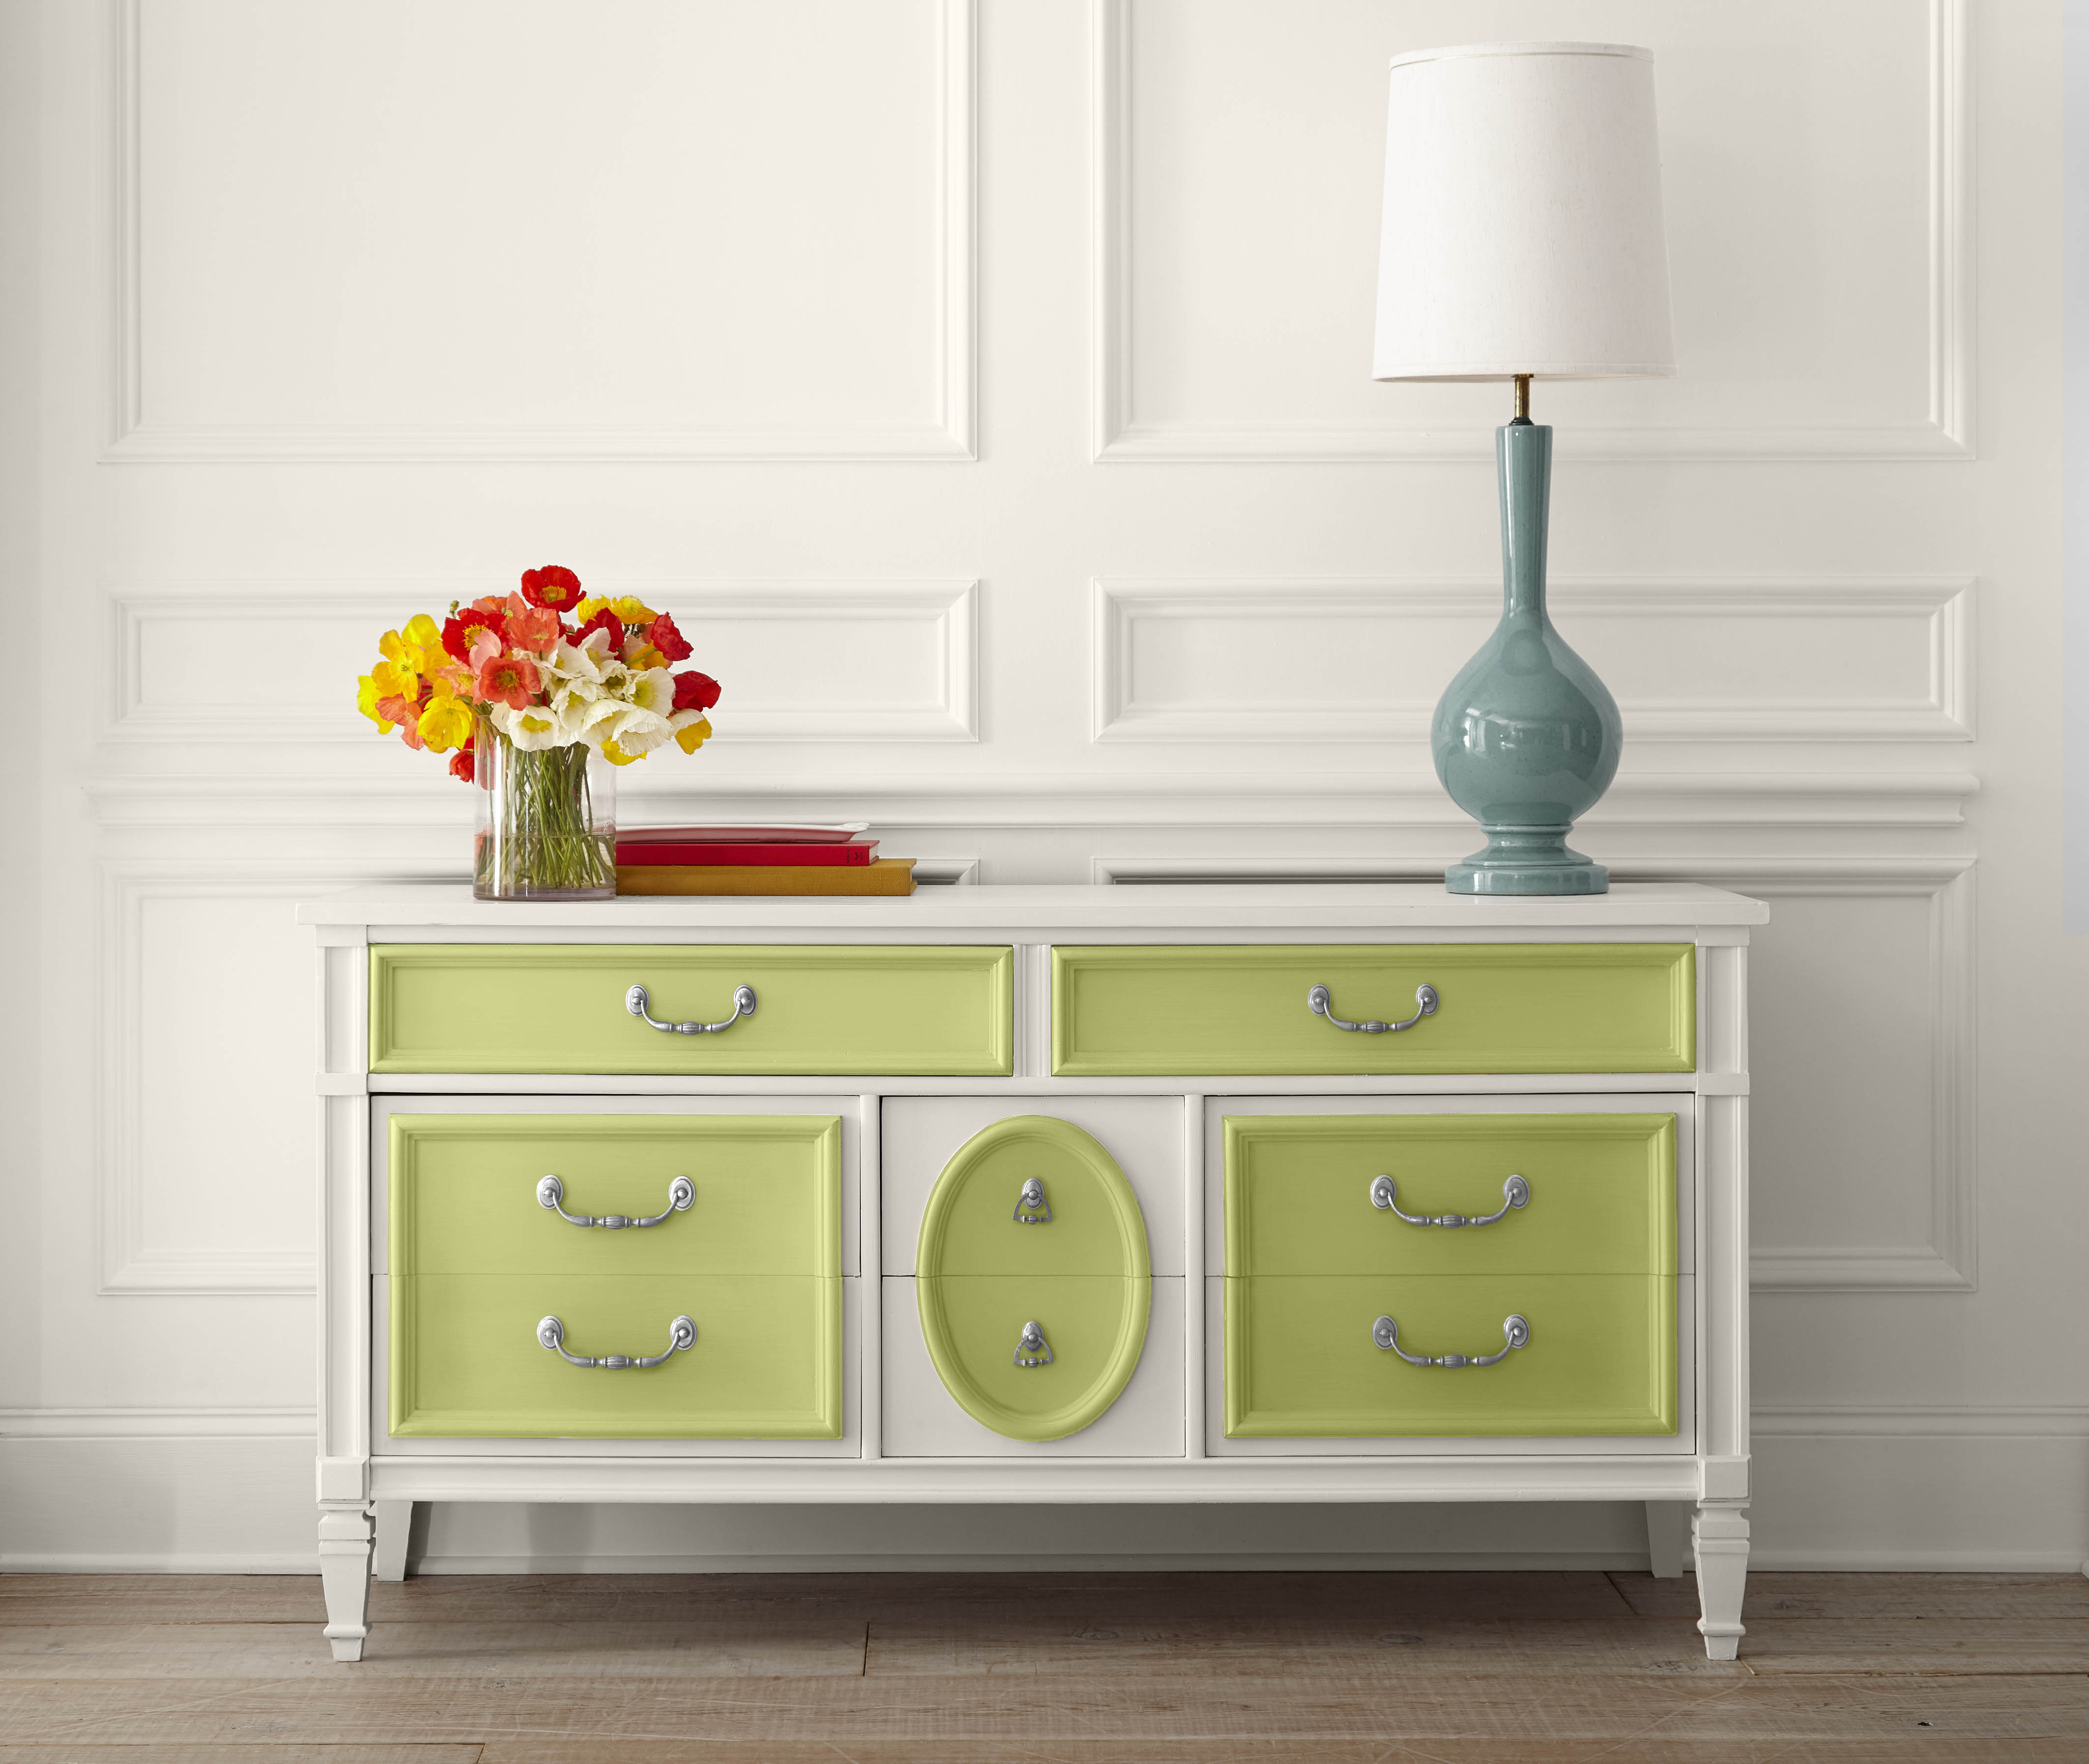 A white antique dresser with light green accents